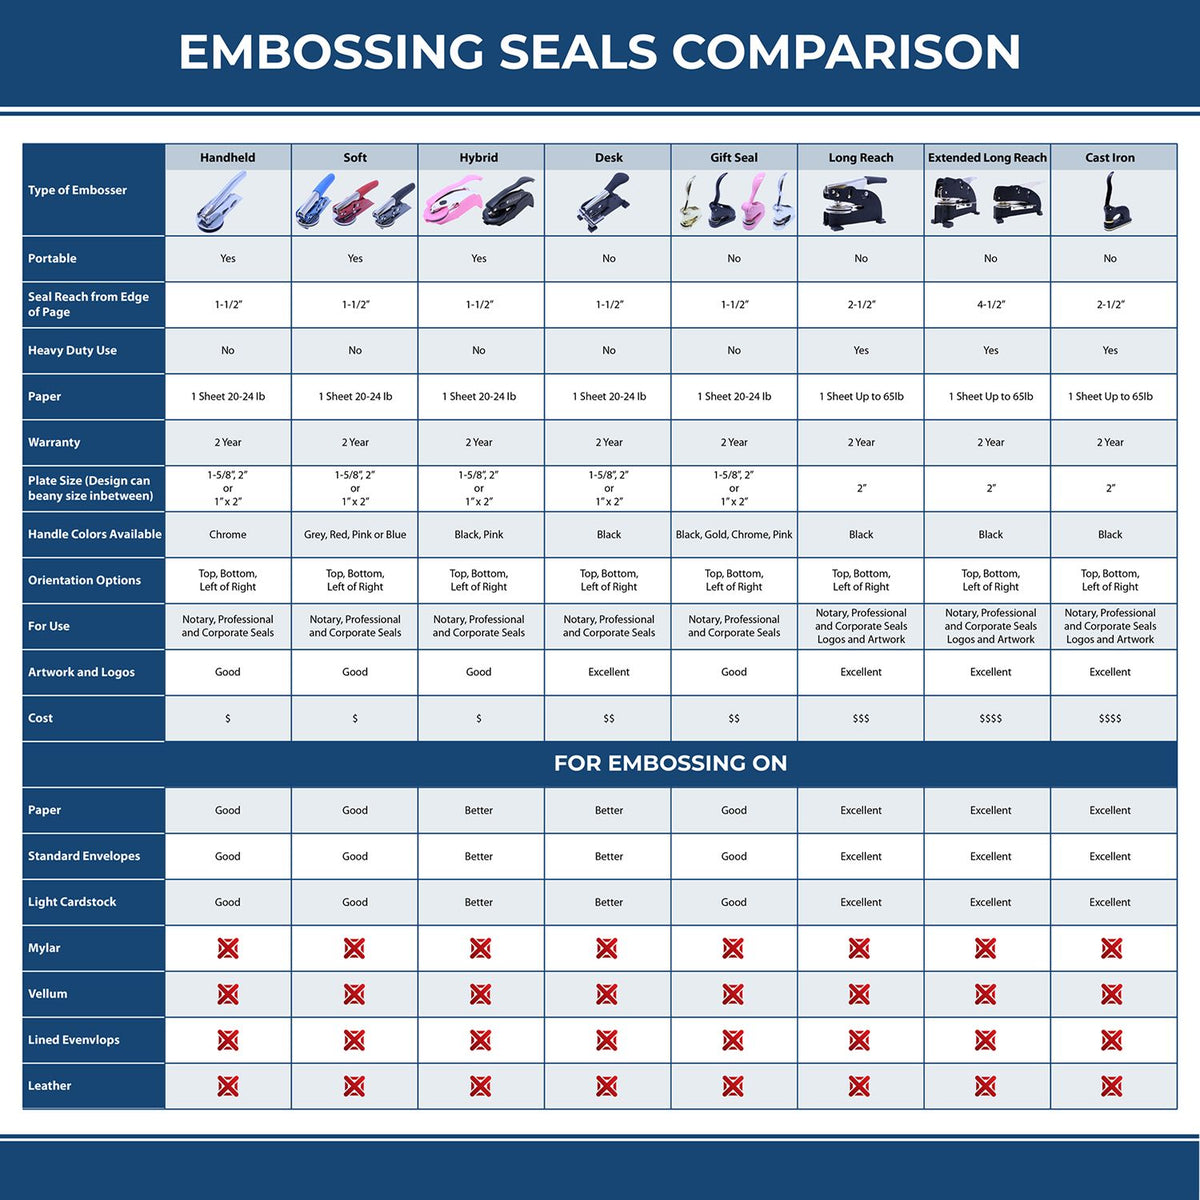 A comparison chart for the different types of mount models available for the Handheld Guam Professional Engineer Embosser.